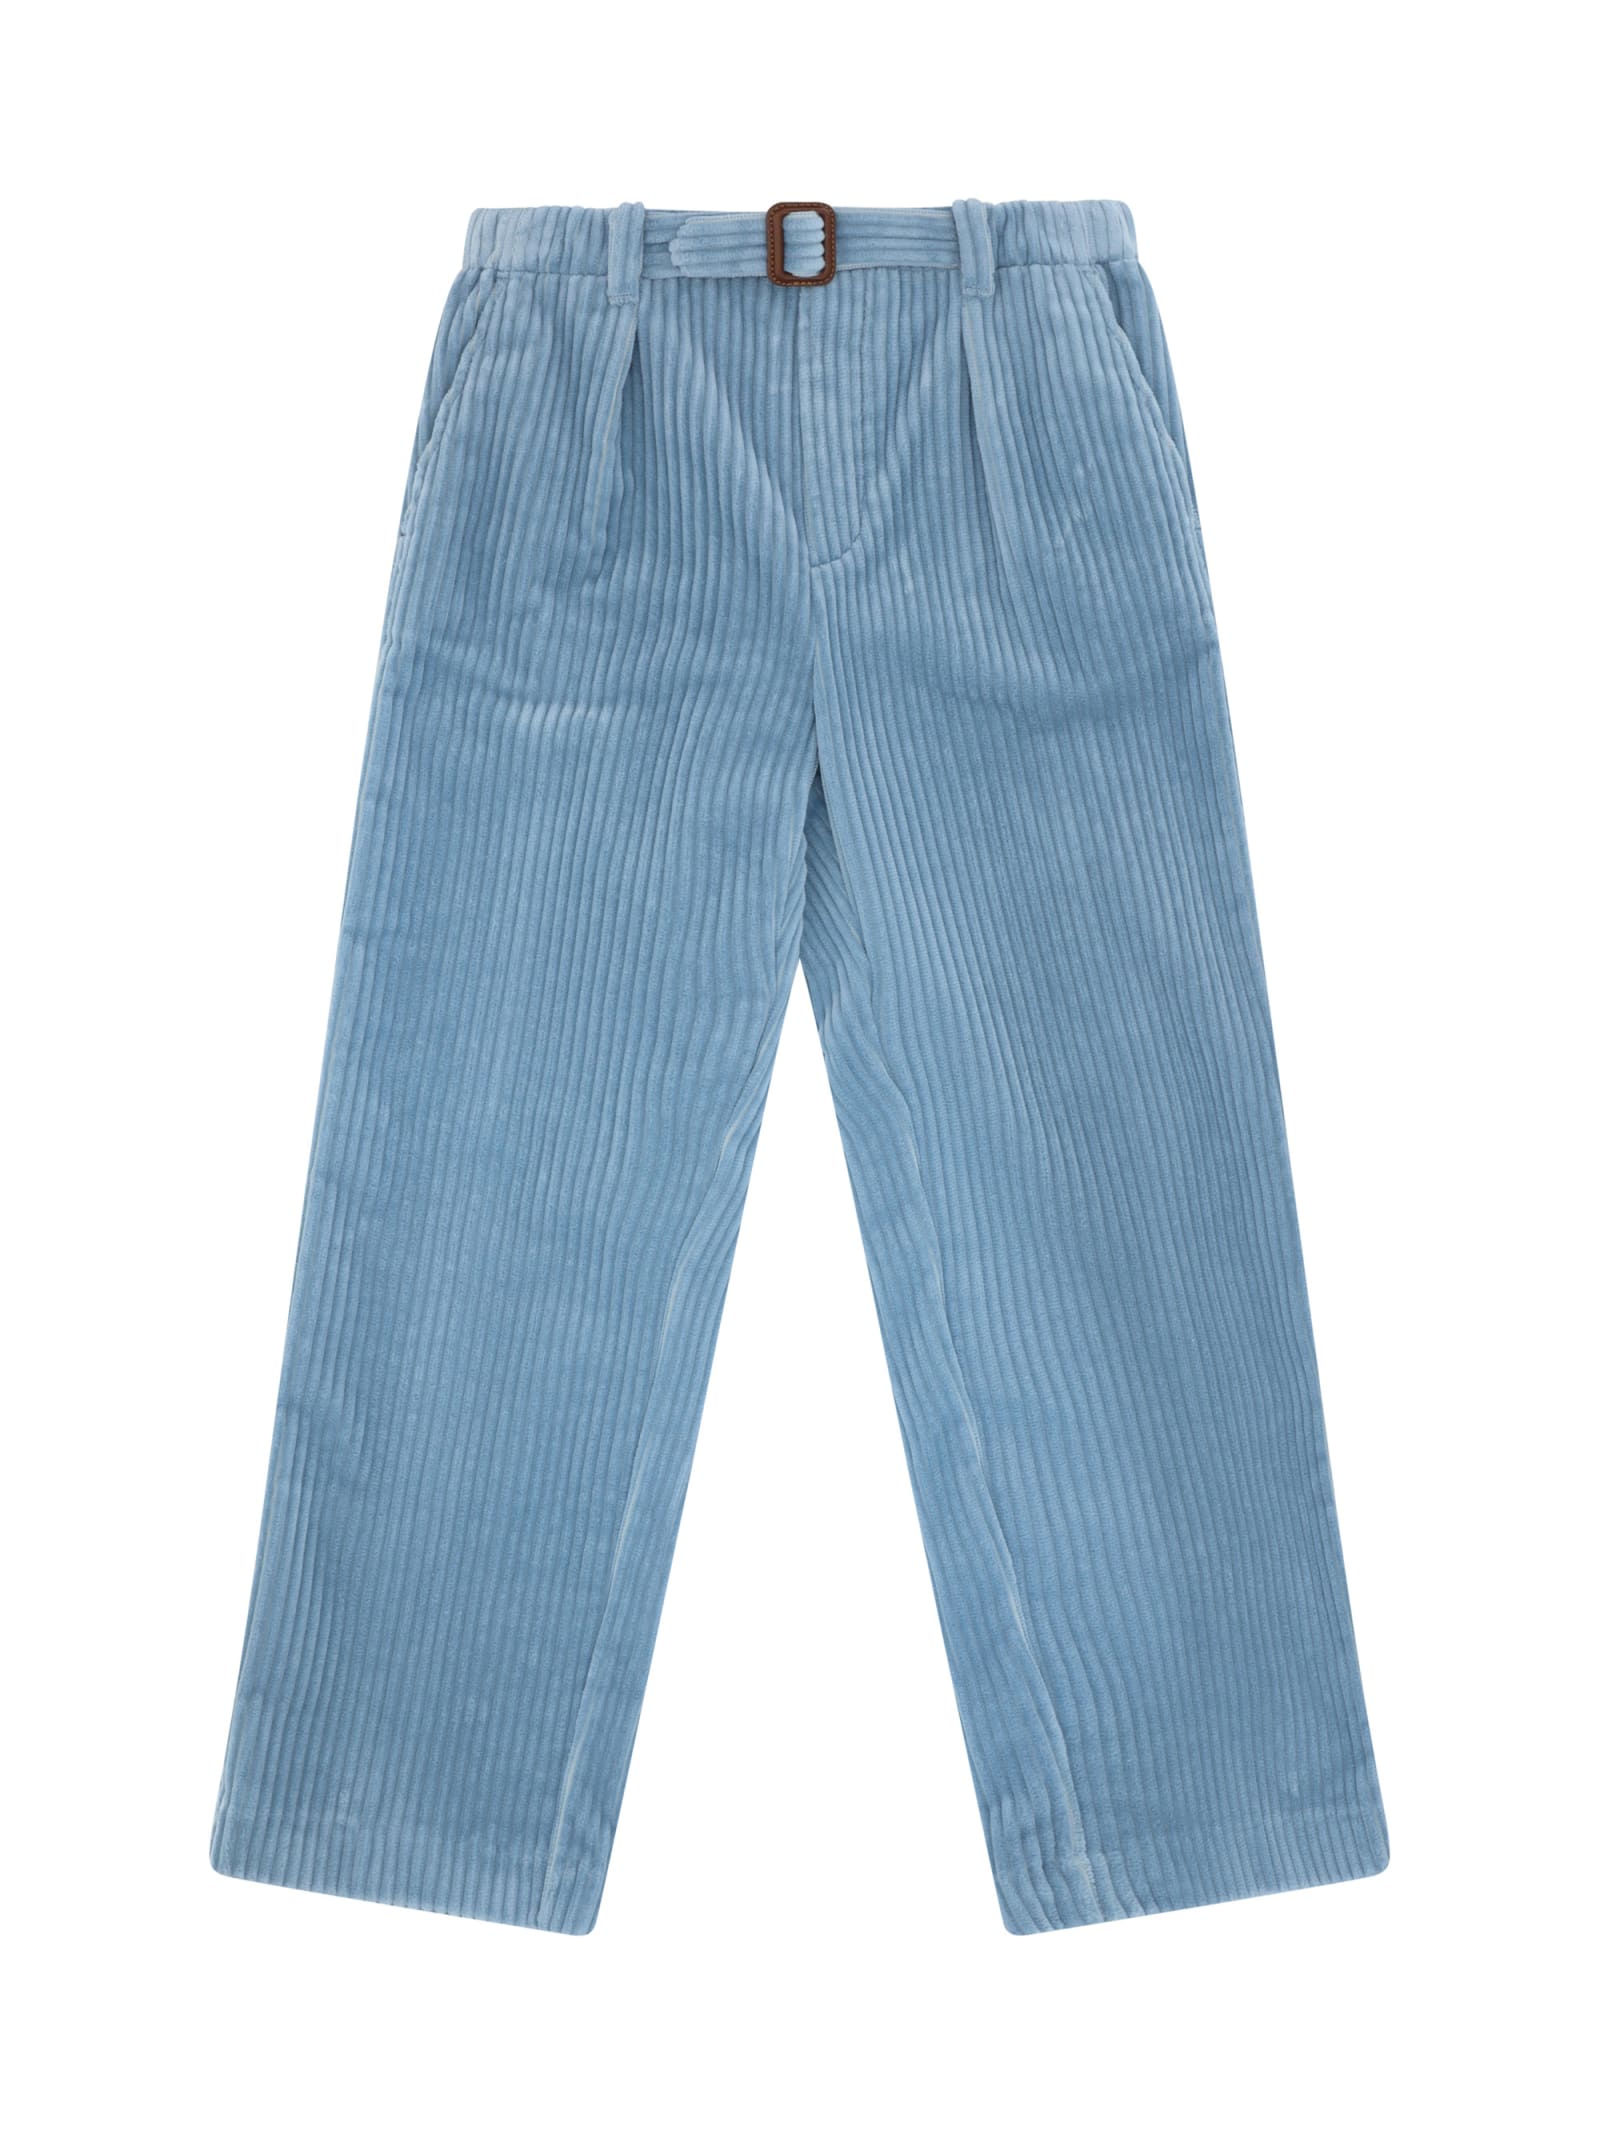 Gucci Kids' Pants For Boy In Cupid